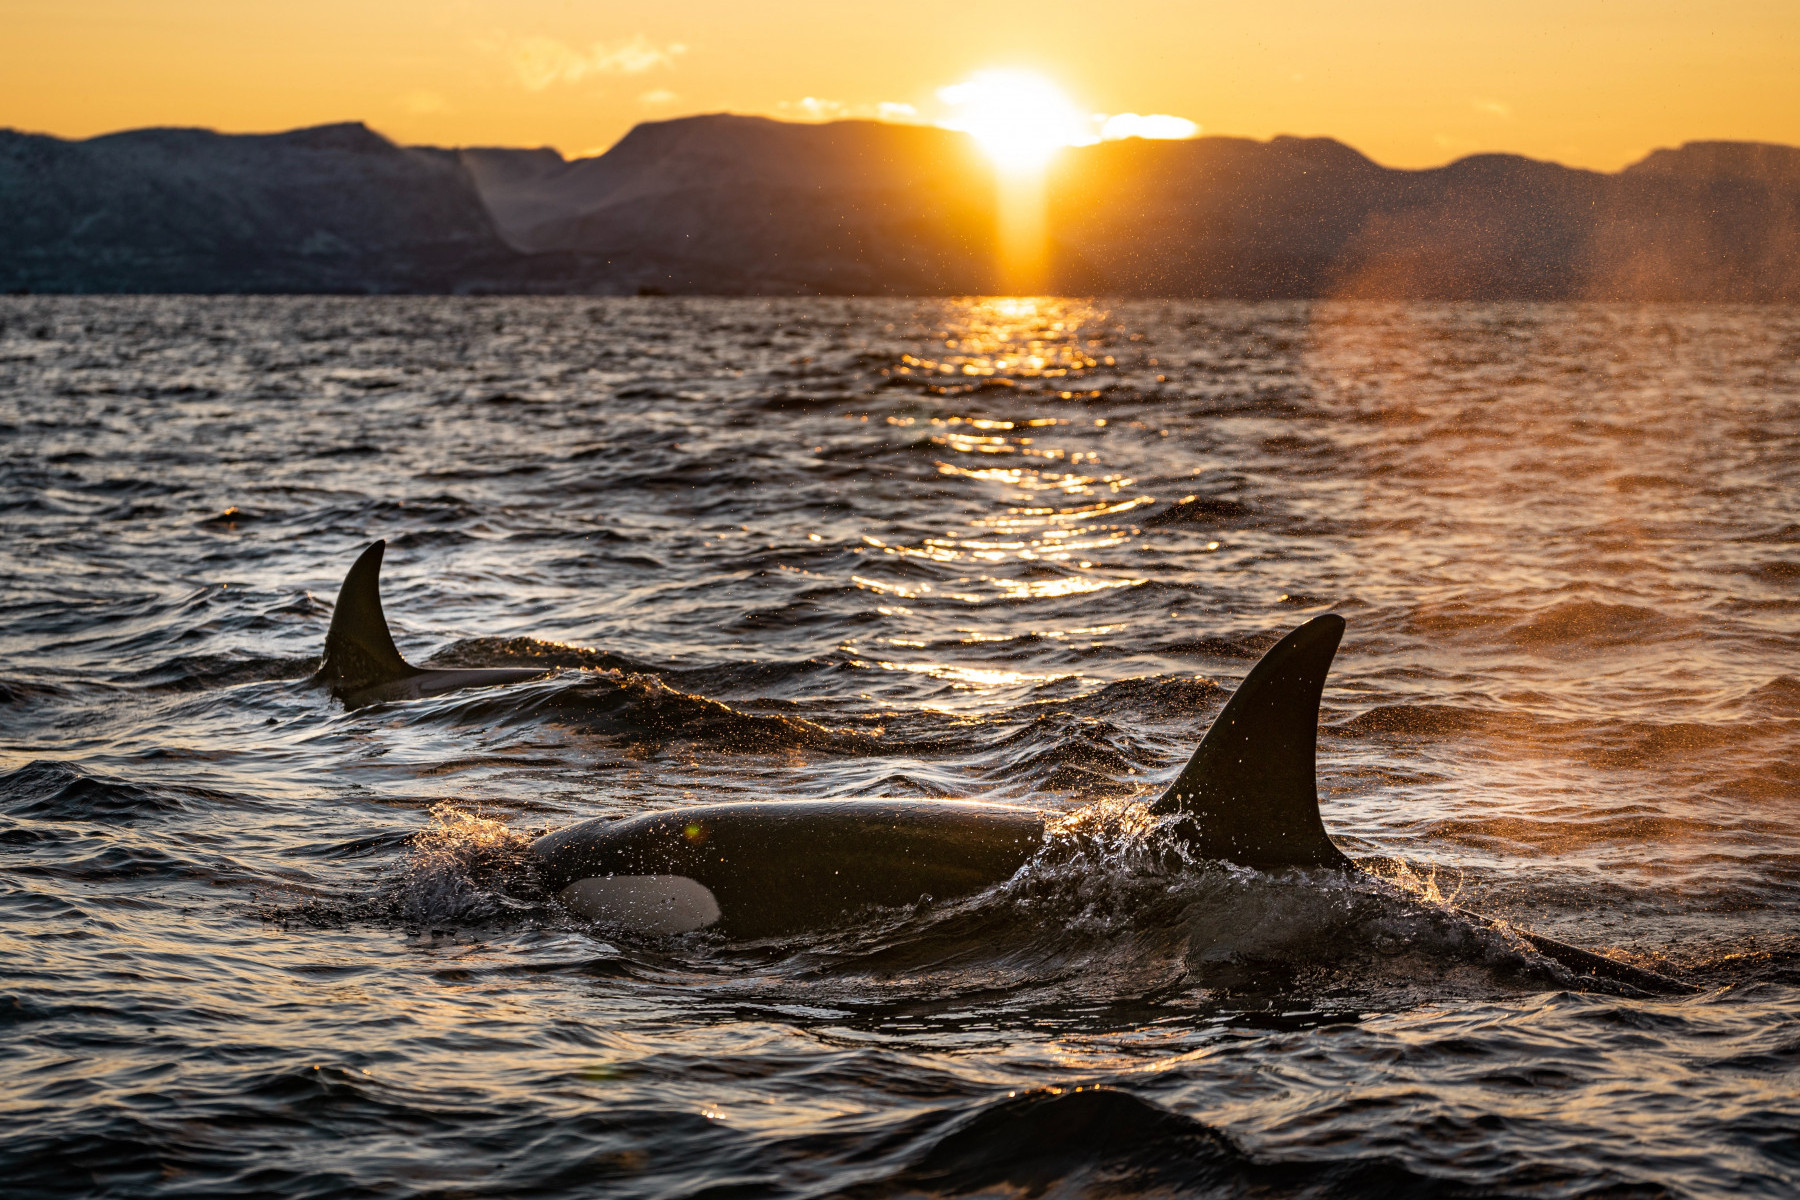 Two orca whales swimming in the ocean with the sun setting in the background.